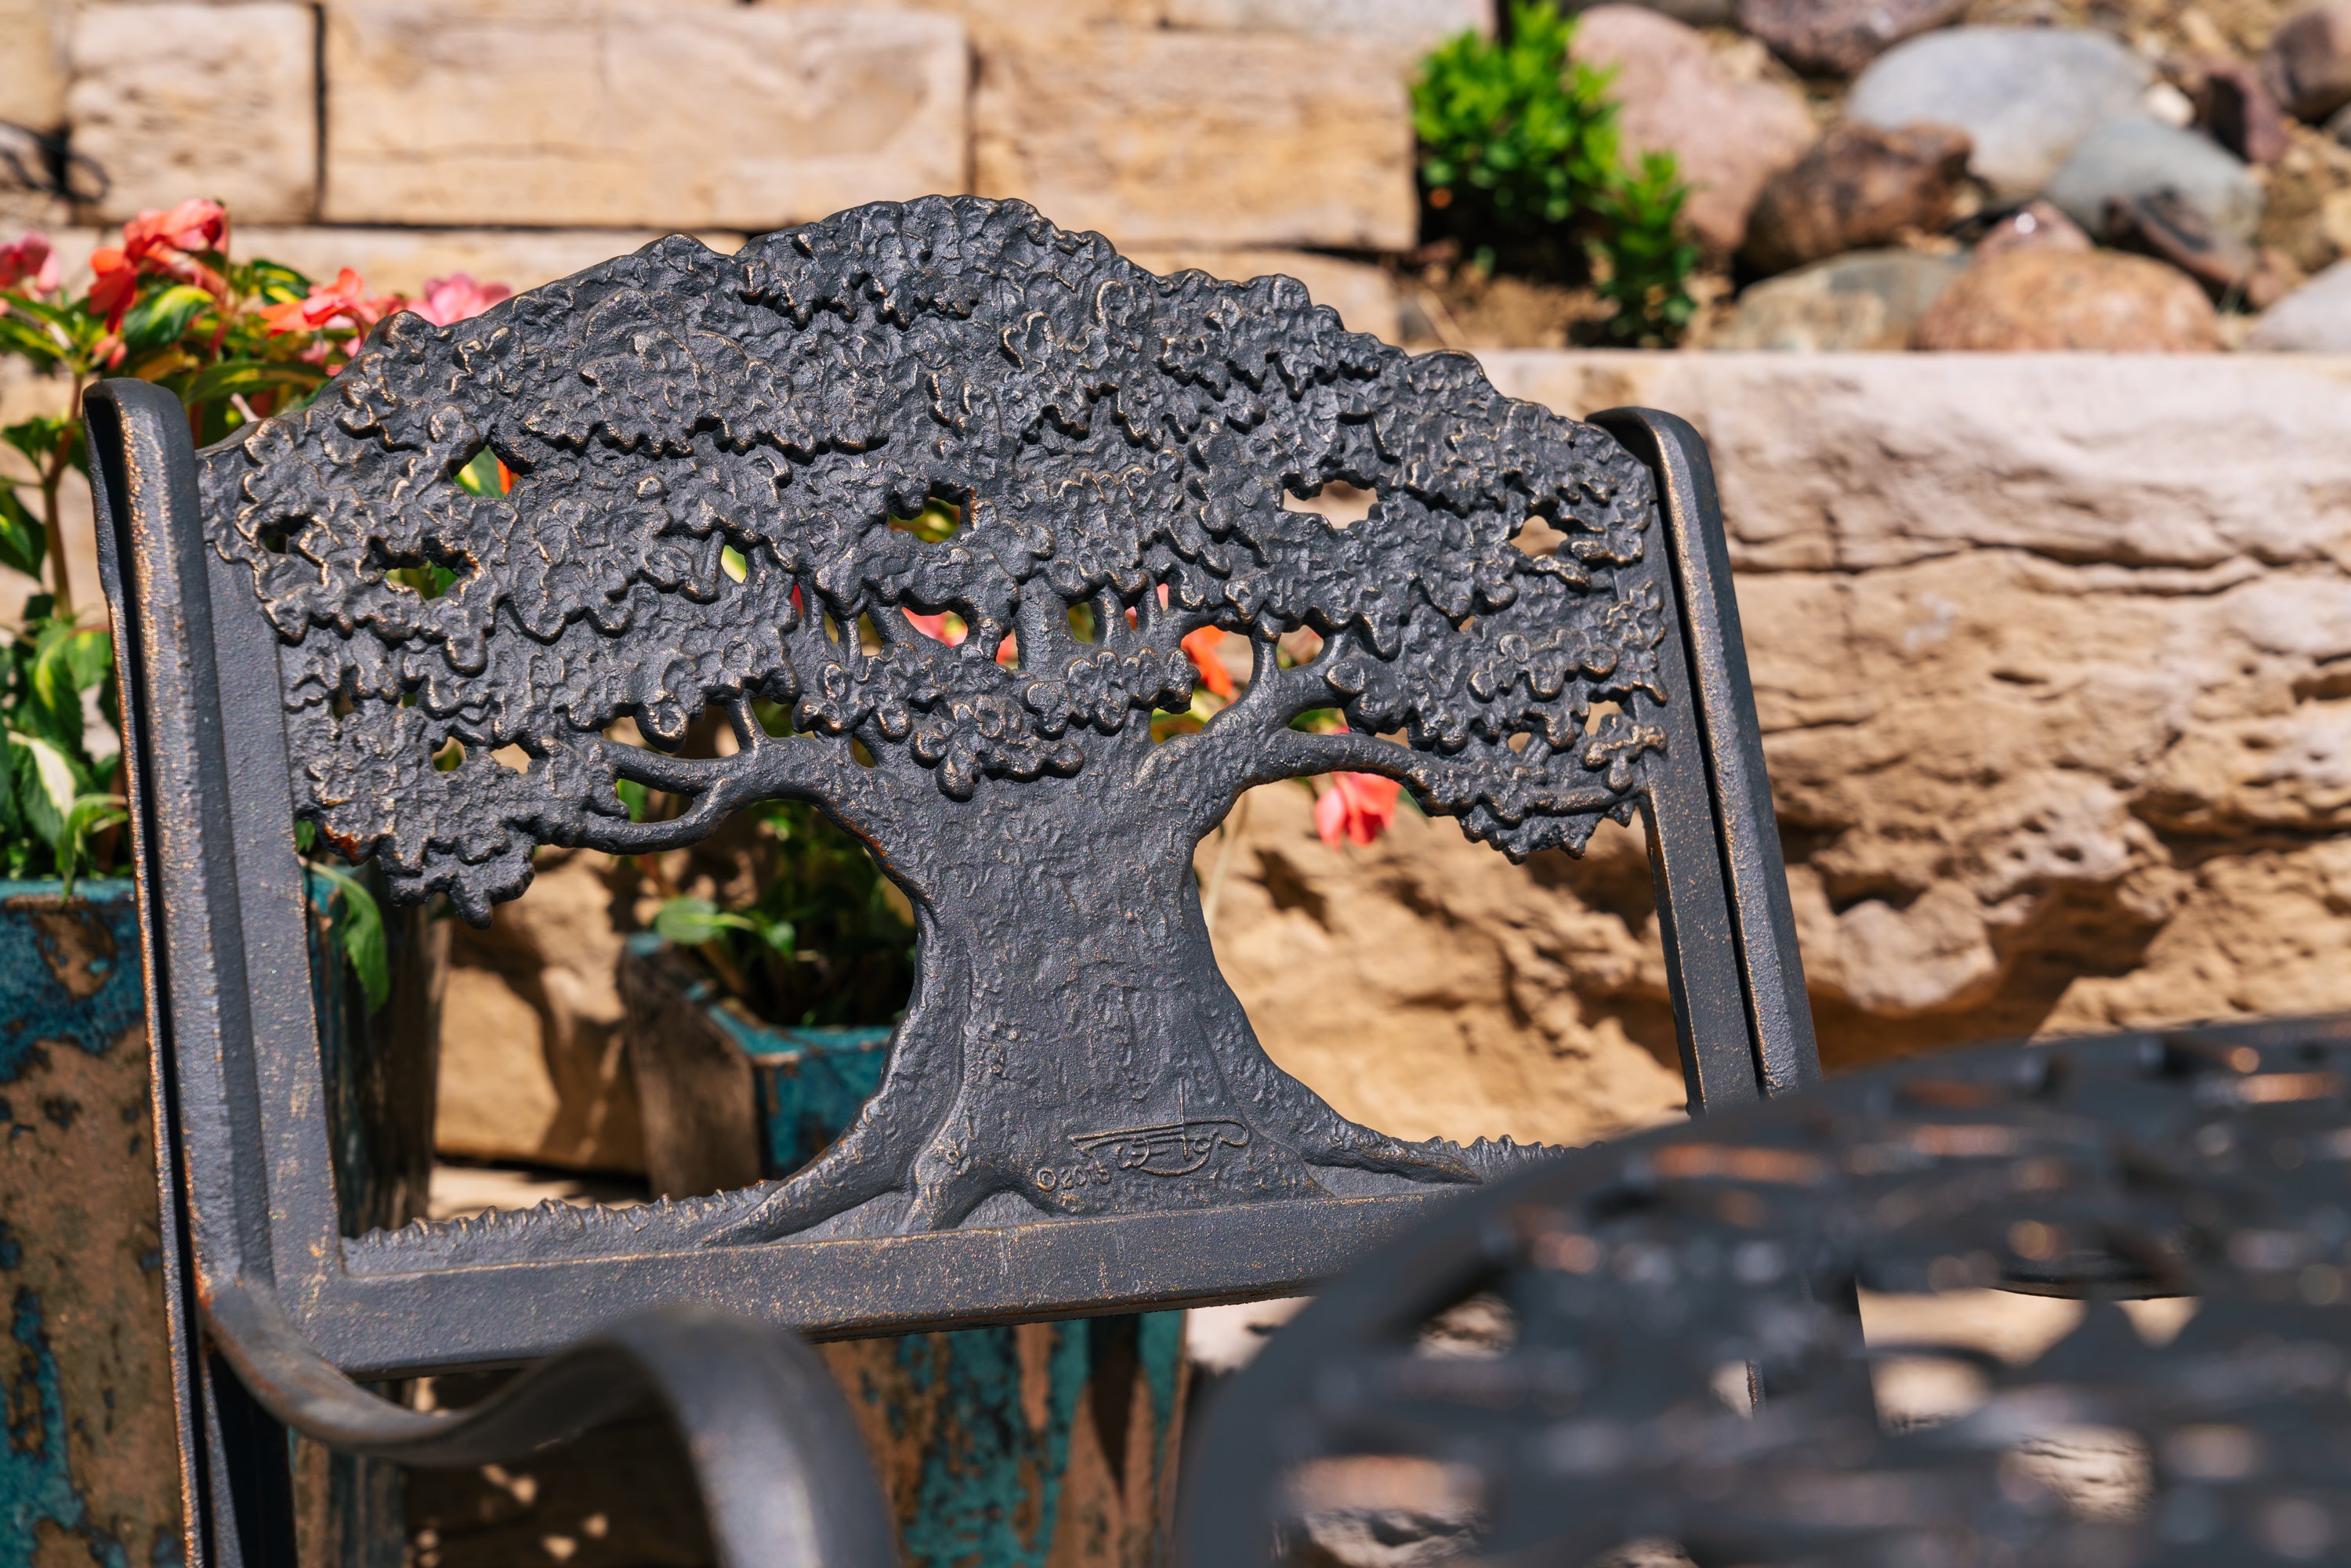 Tree of Life Chair